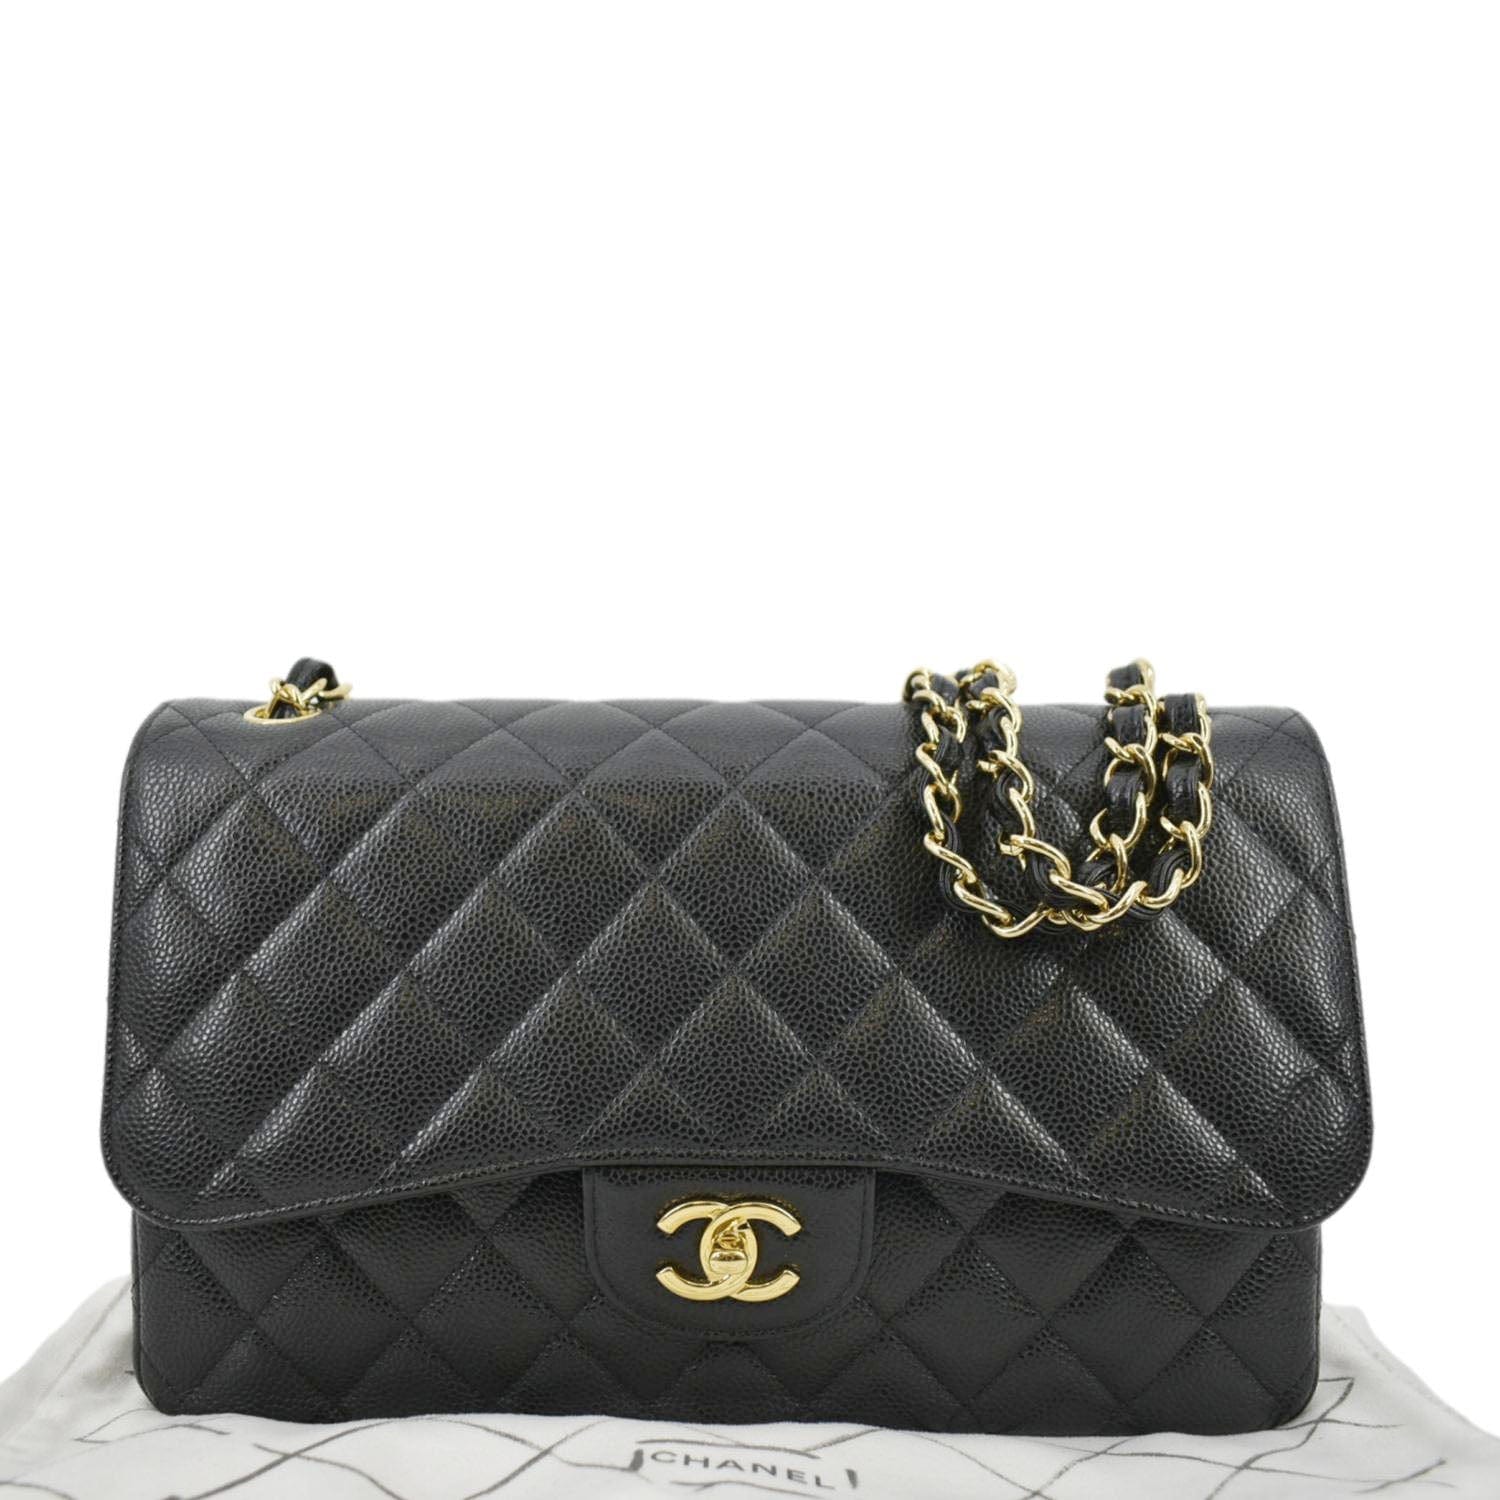 MEDIUM CHANEL CLASSIC DOUBLE FLAP BAG  Review & What Fits Inside! Black  Caviar Leather With Gold 